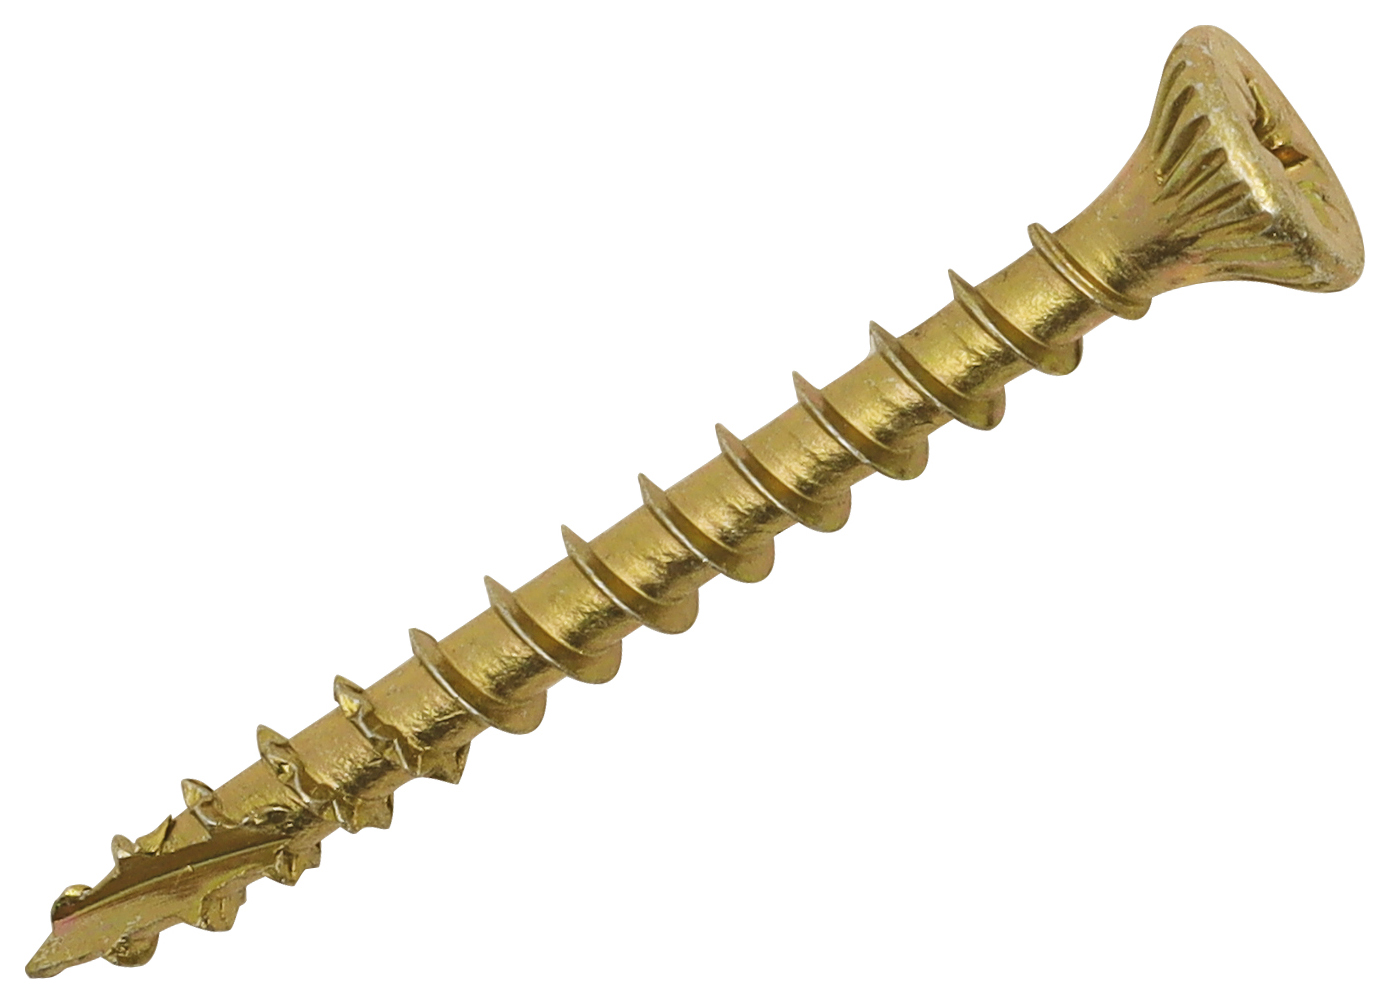 Optimaxx PZ Countersunk Passivated Double Reinforced Wood Screw Maxxtub - 5 x 50mm - Pack of 600